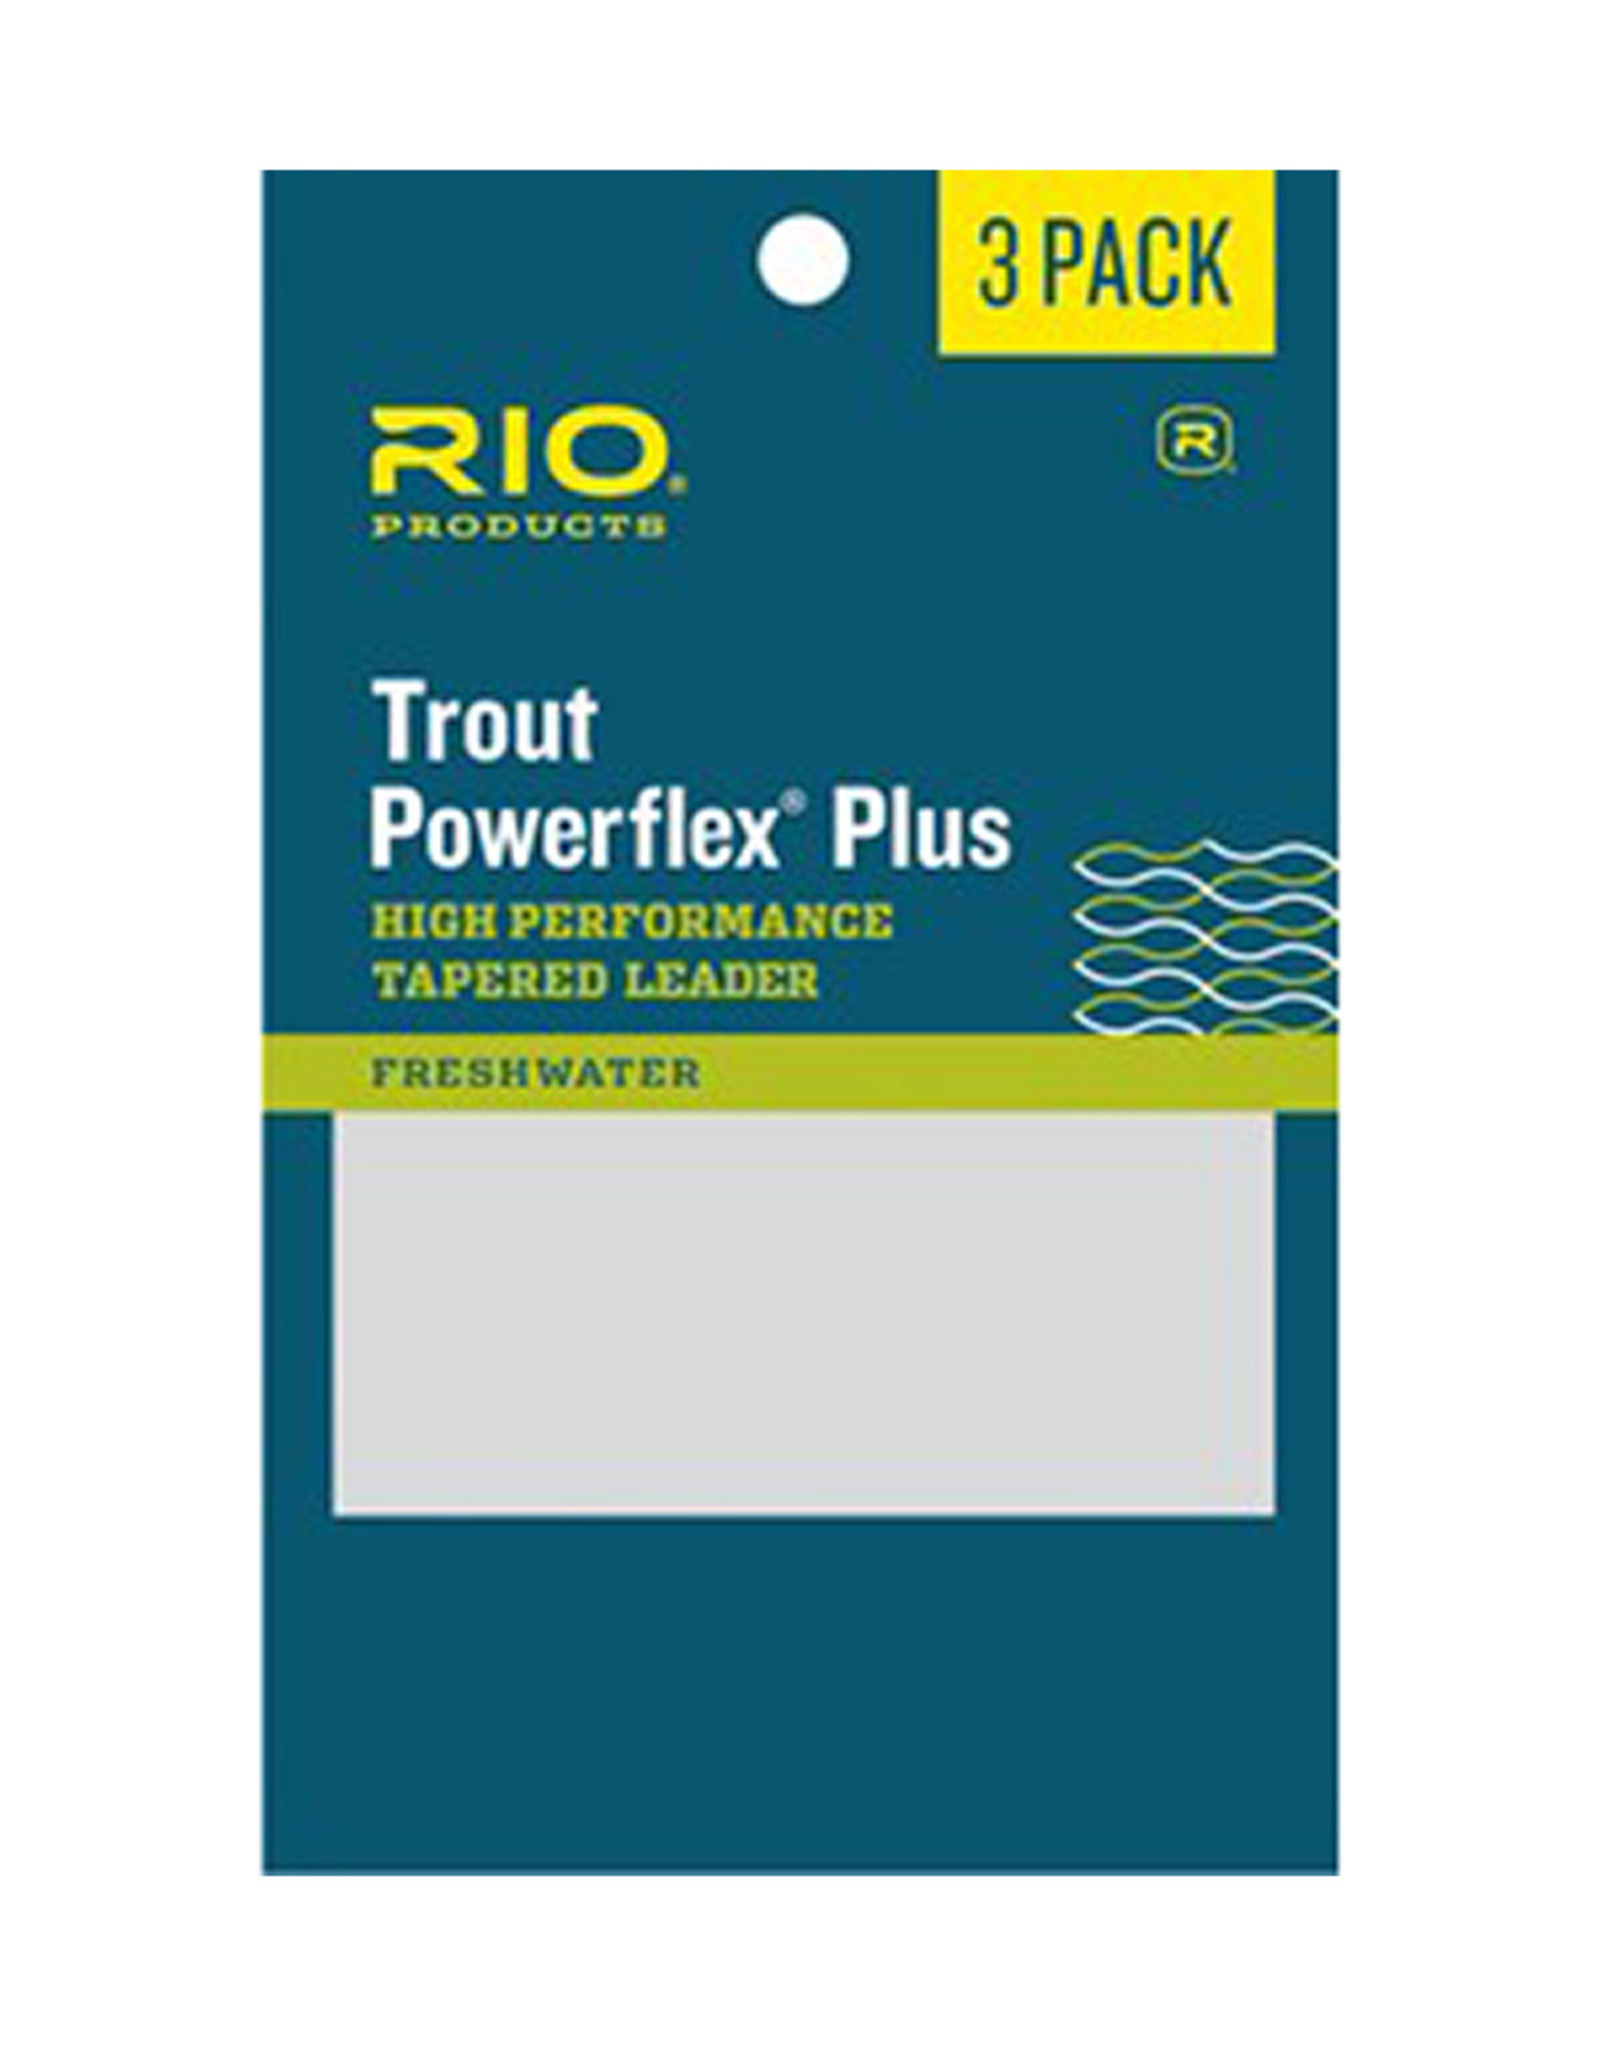 RIO Products Powerflex Plus 9ft Leader: 3 Pack